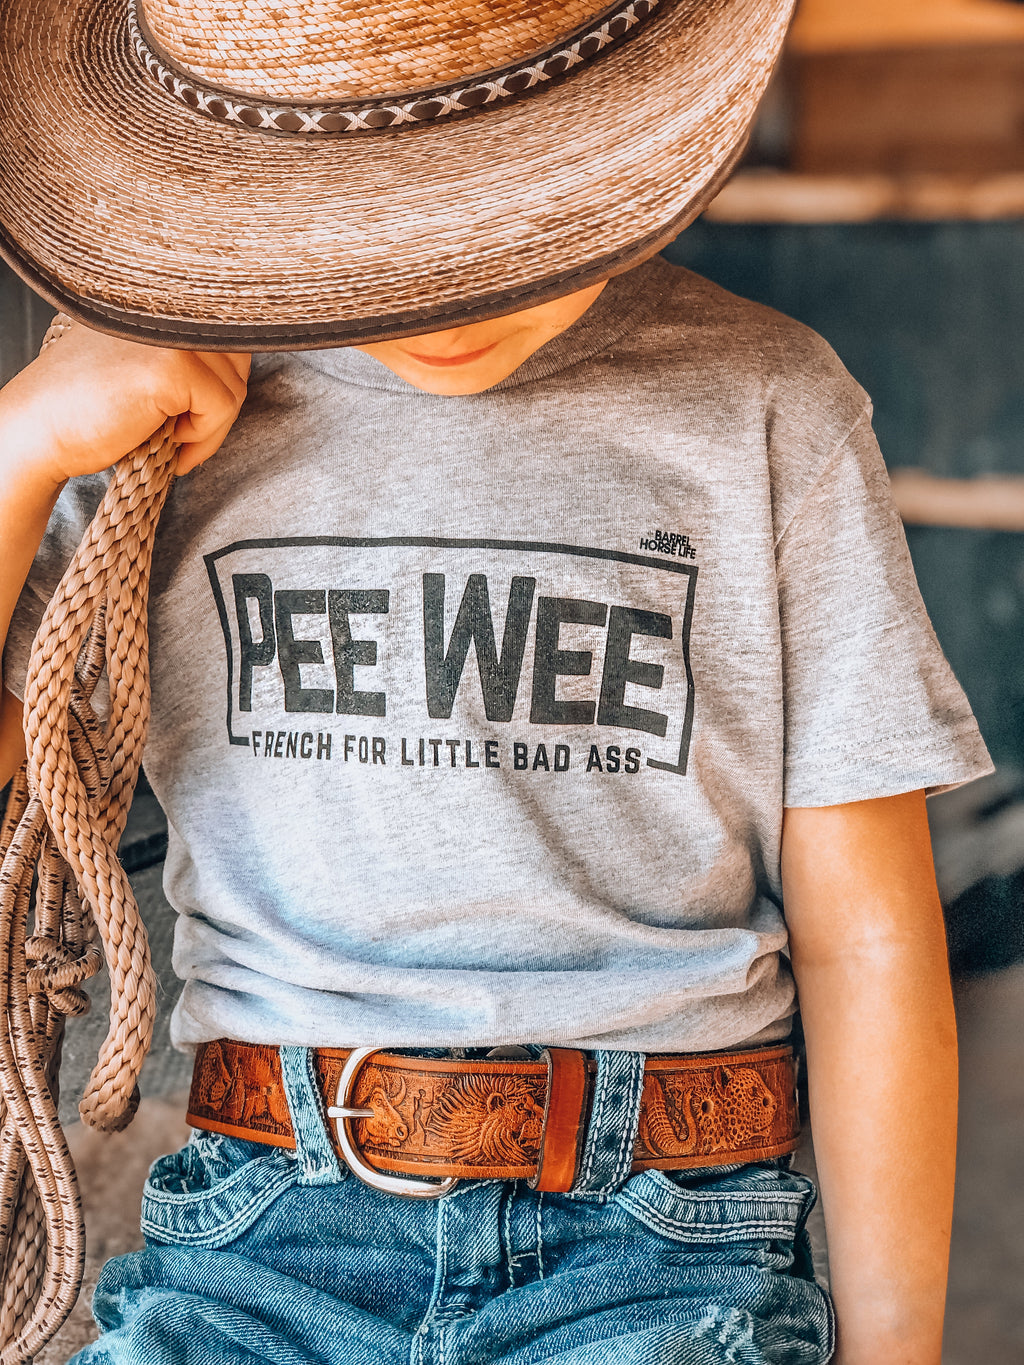 Pee Wee, Youth T-Shirt